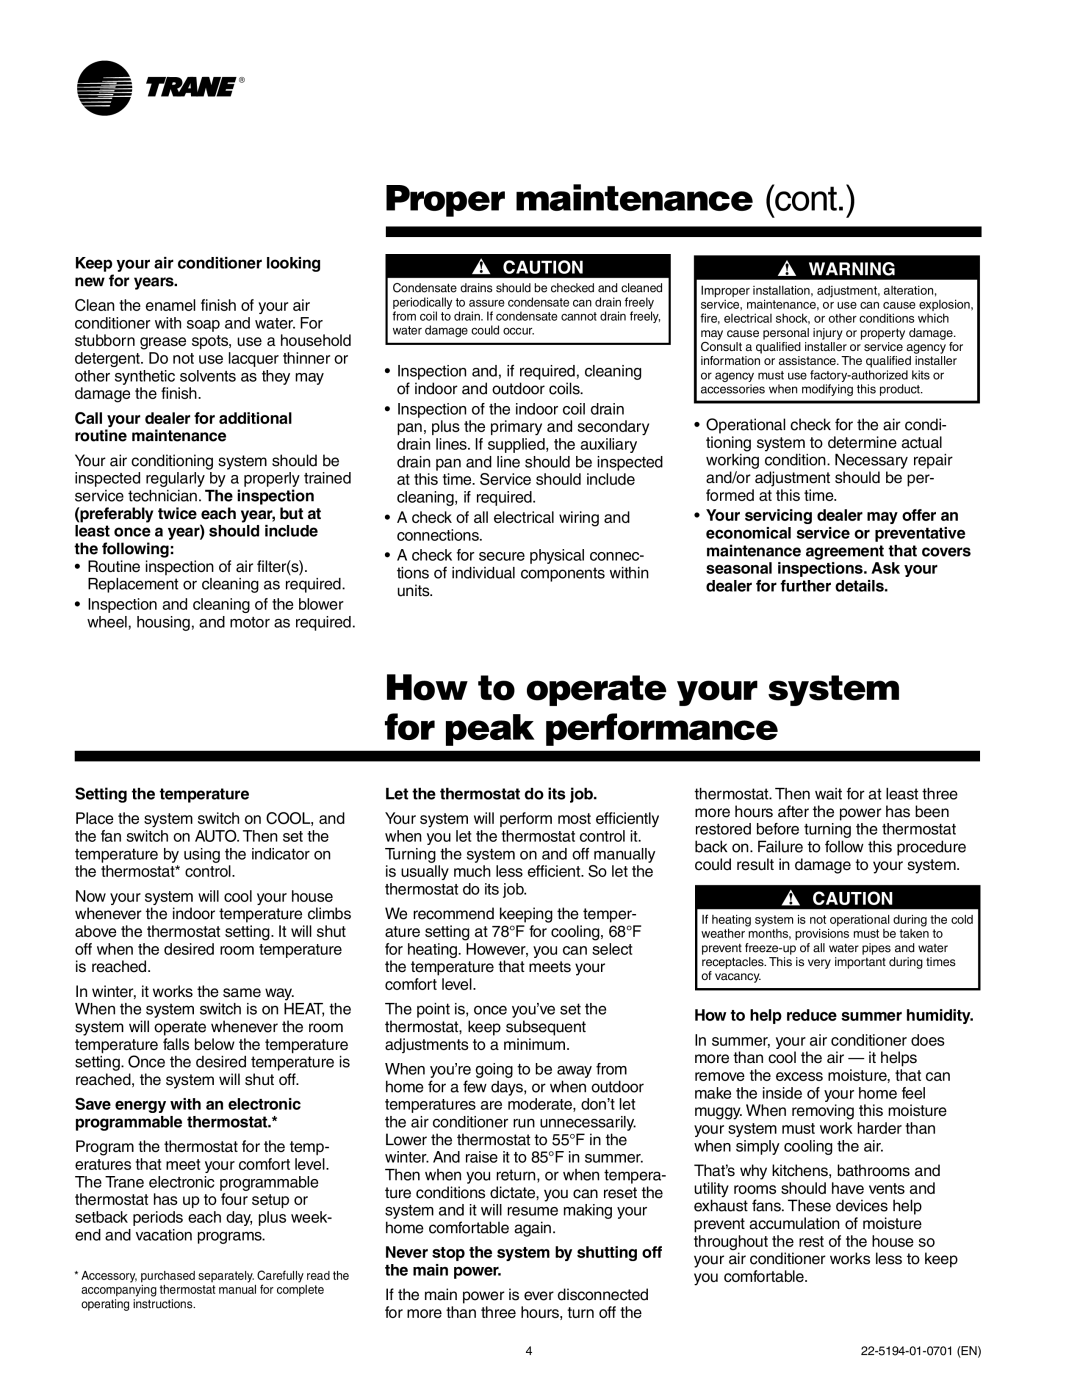 Trane XL manual Proper maintenance cont, How to operate your system for peak performance 